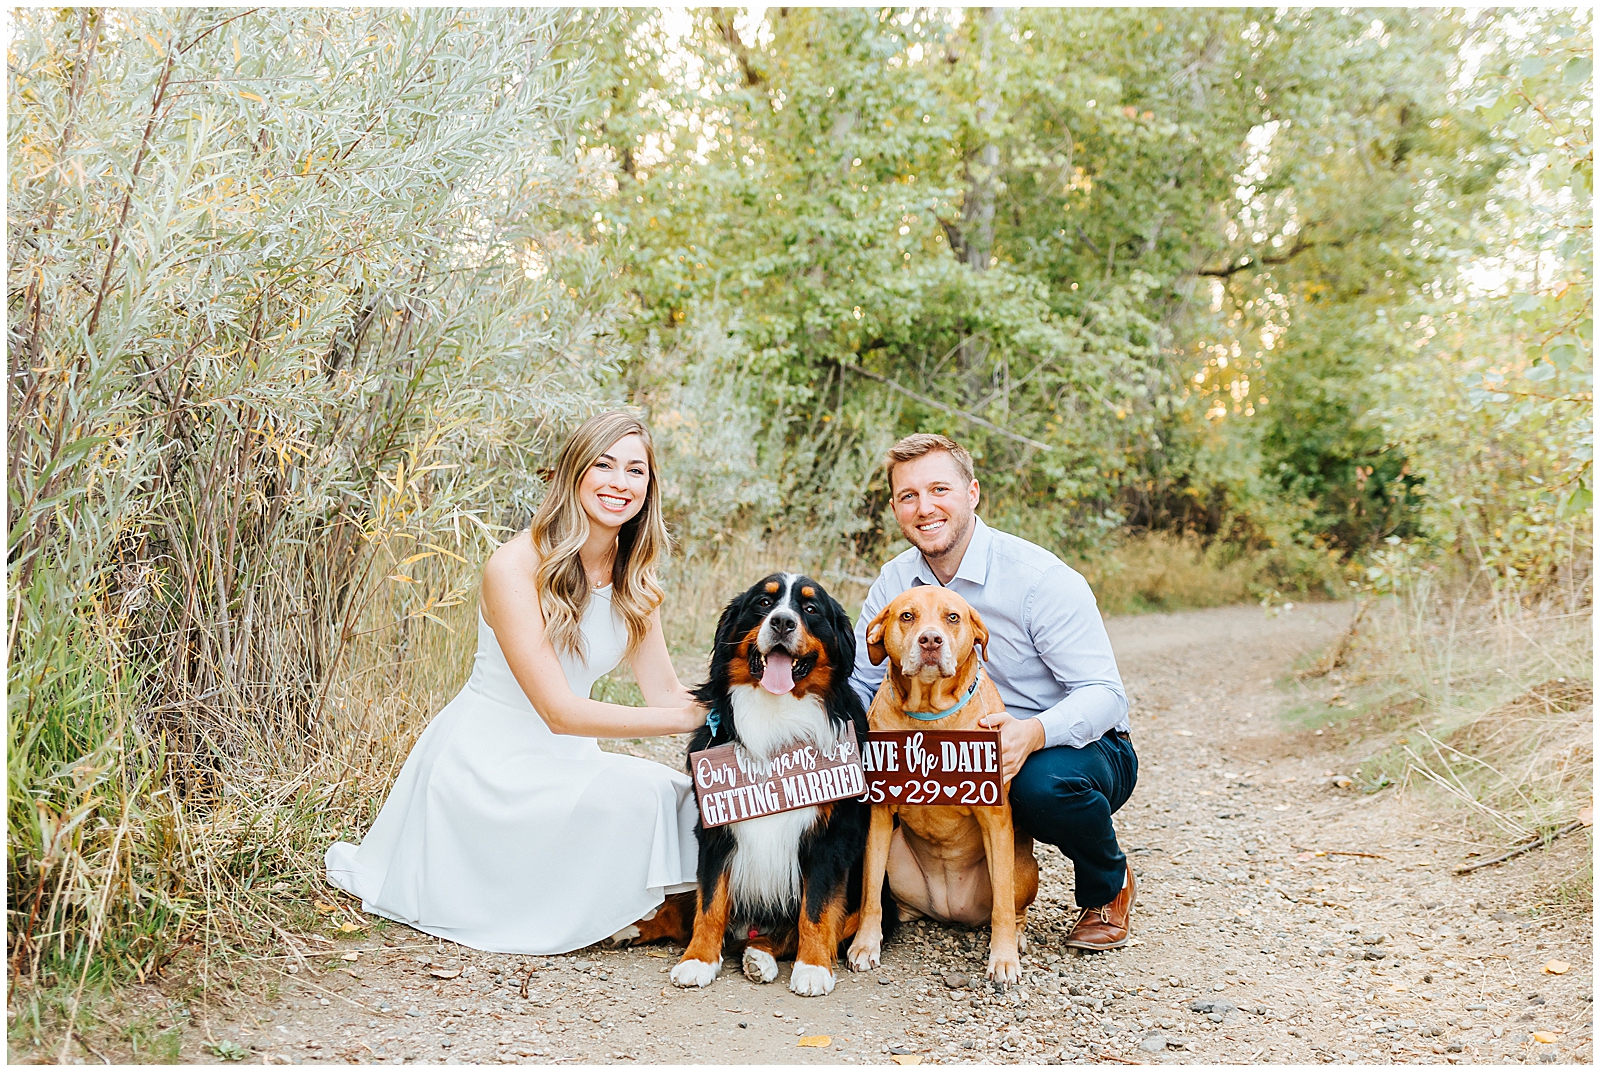 Our Humans are getting married engagement session with dogs